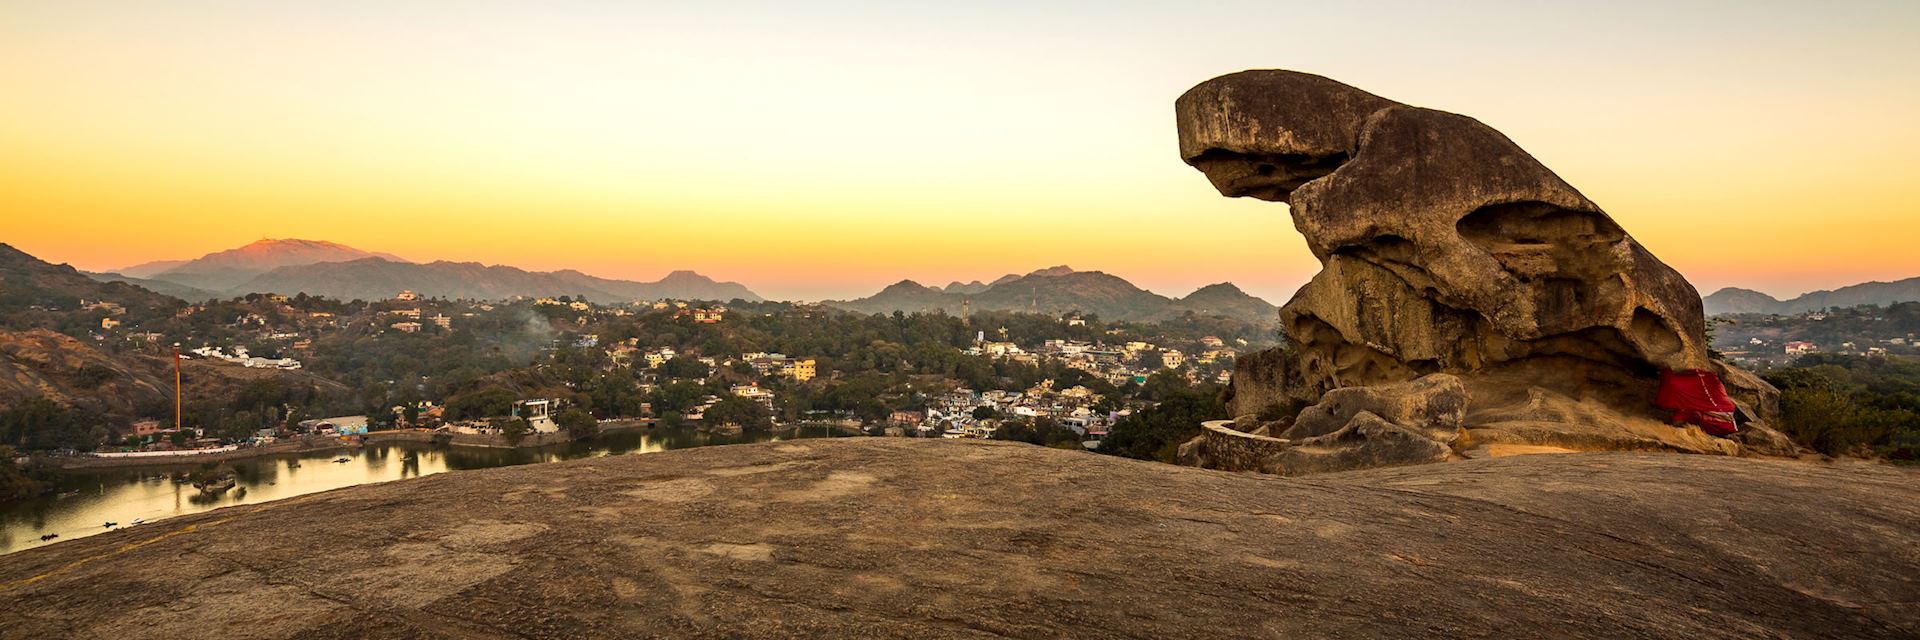 https://media.audleytravel.com/-/media/images/home/indian-subcontinent/india/places/istock1135654650_mountabu_800x2400.jpg?q=79&w=1920&h=640